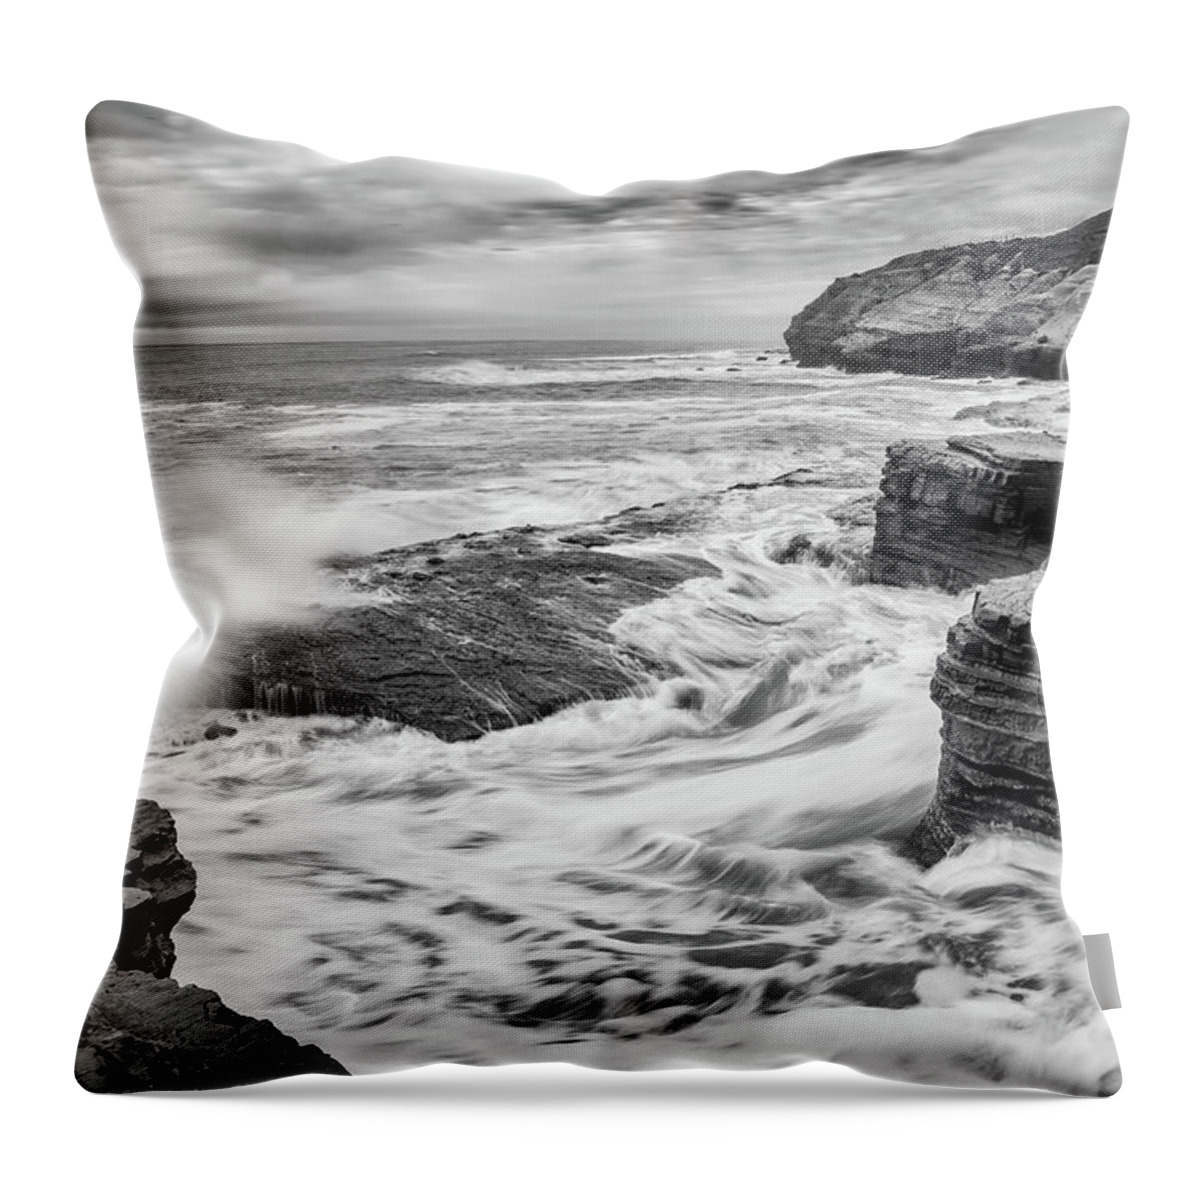 Sunset Cliffs Throw Pillow featuring the photograph High Tide At Sunset Cliffs by Local Snaps Photography